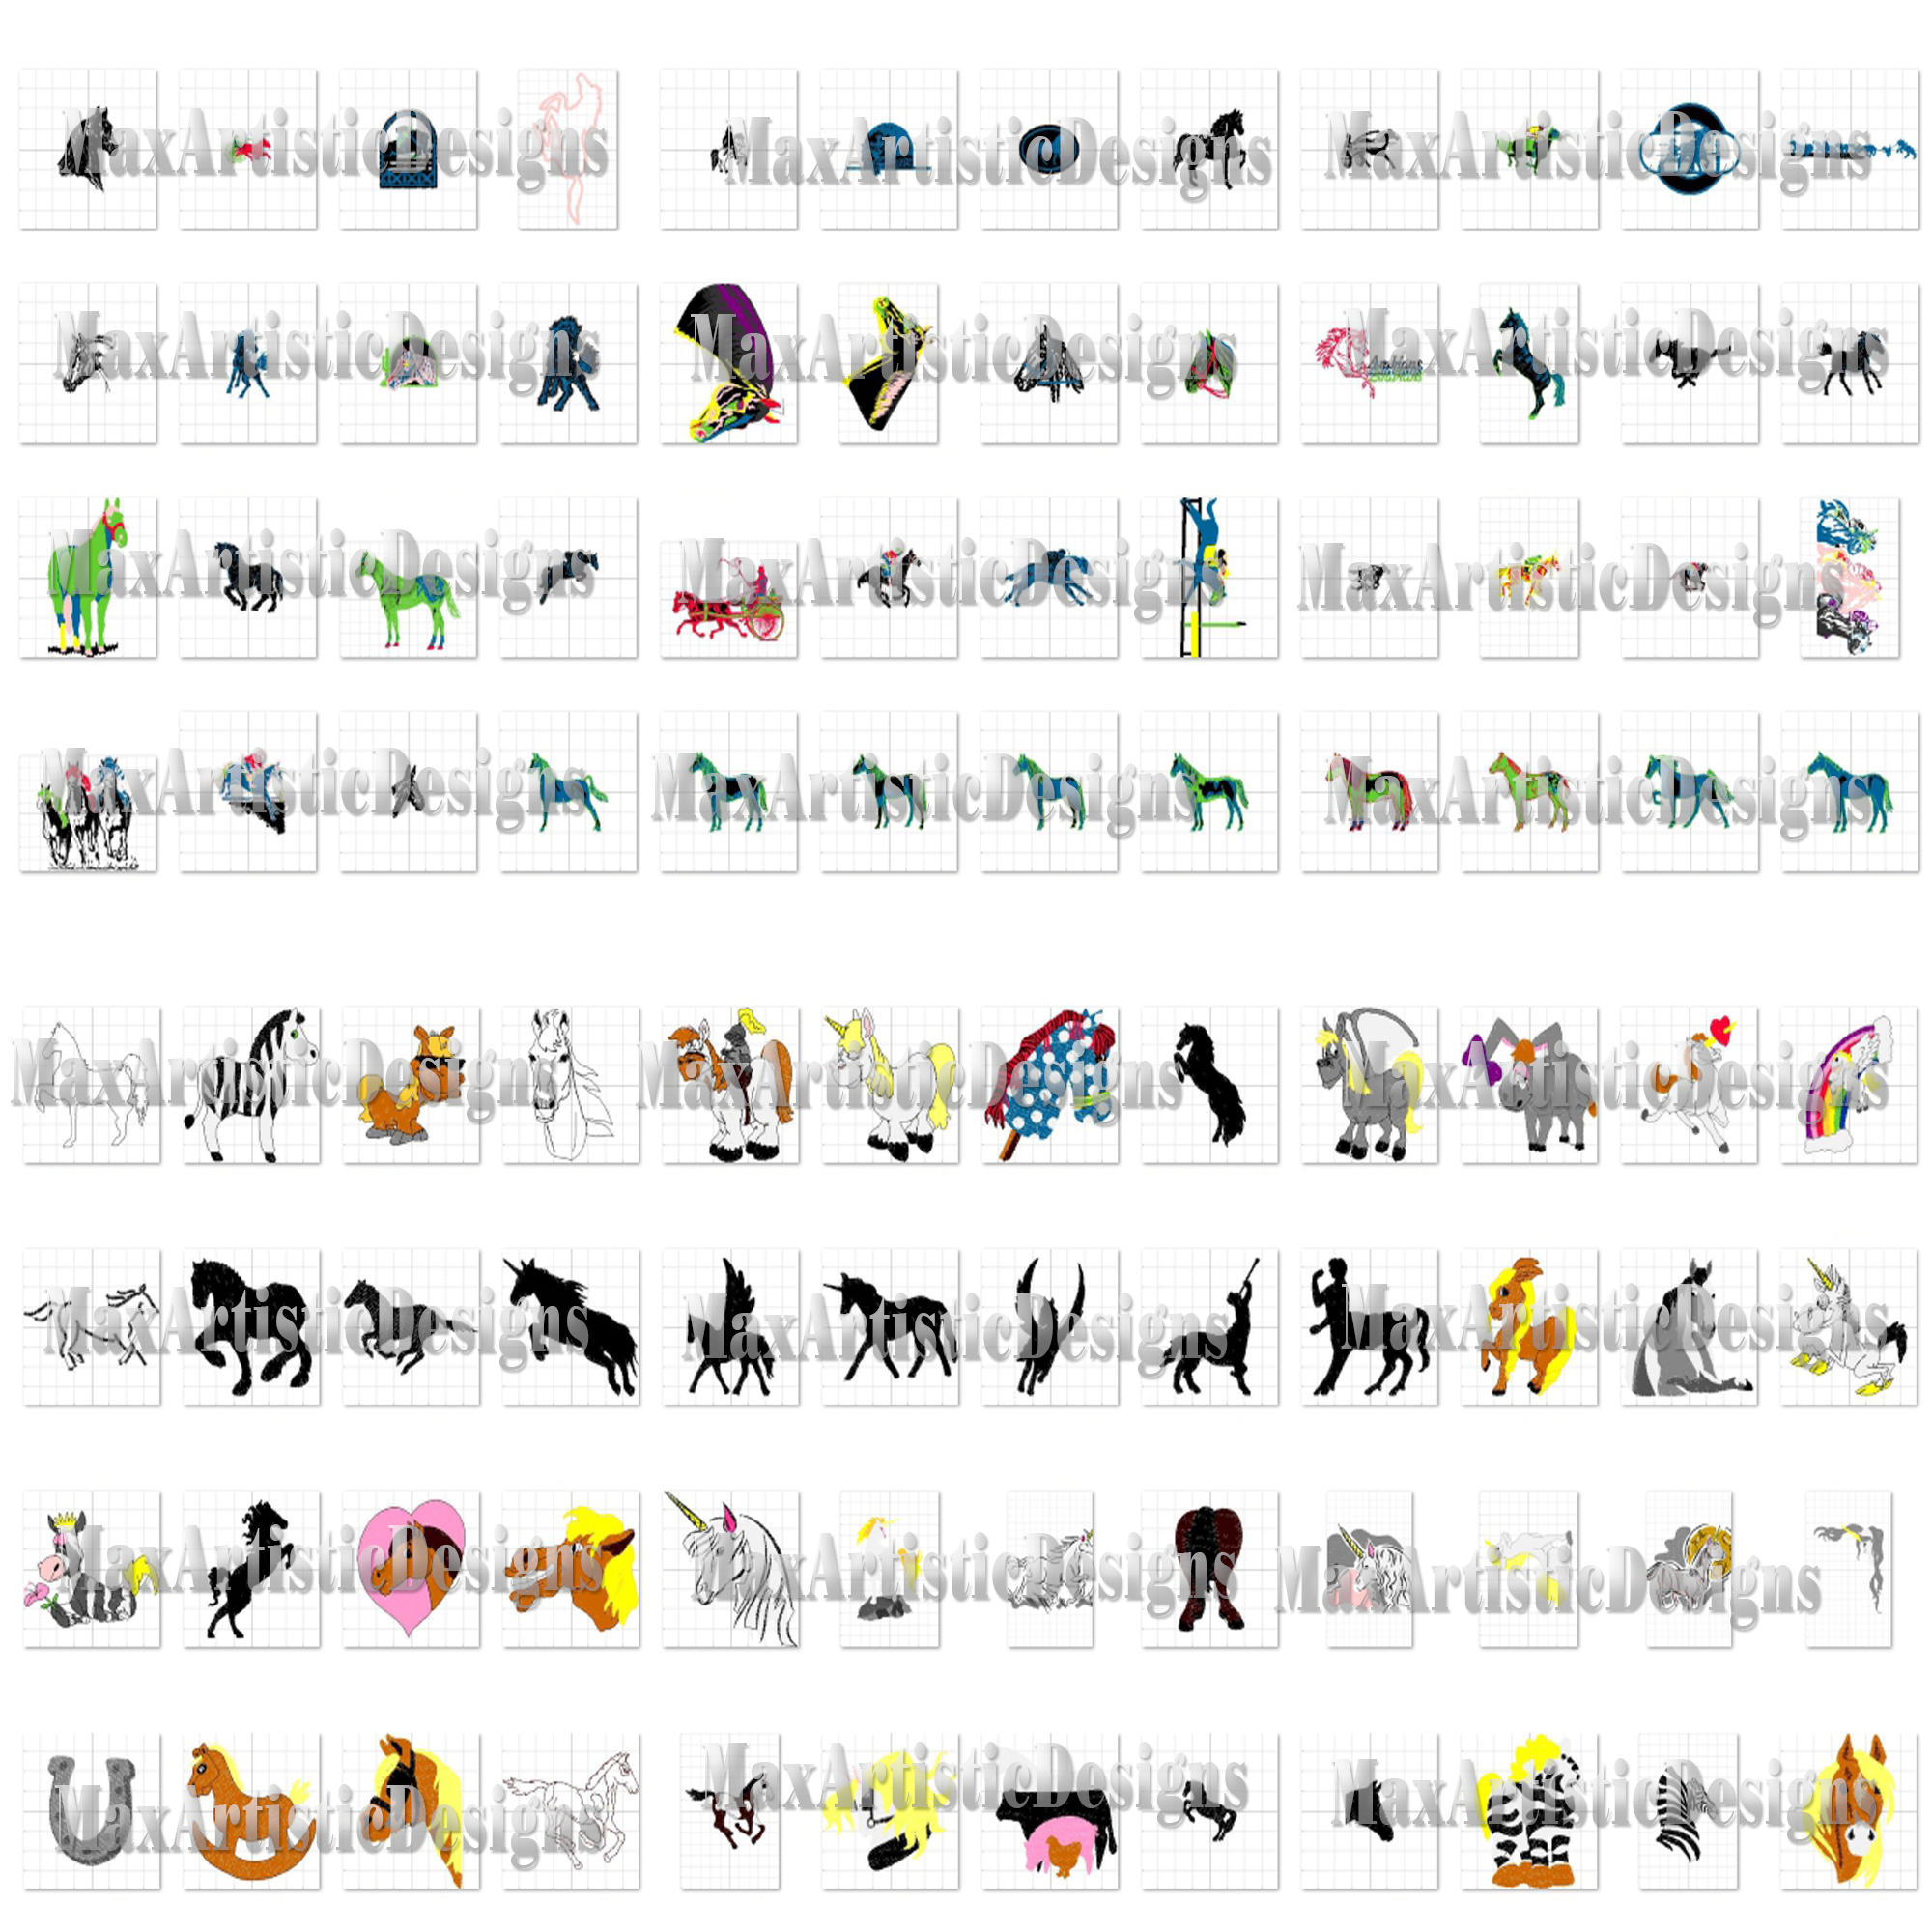 430+Horses embroidery patterns Machine embroidery designs